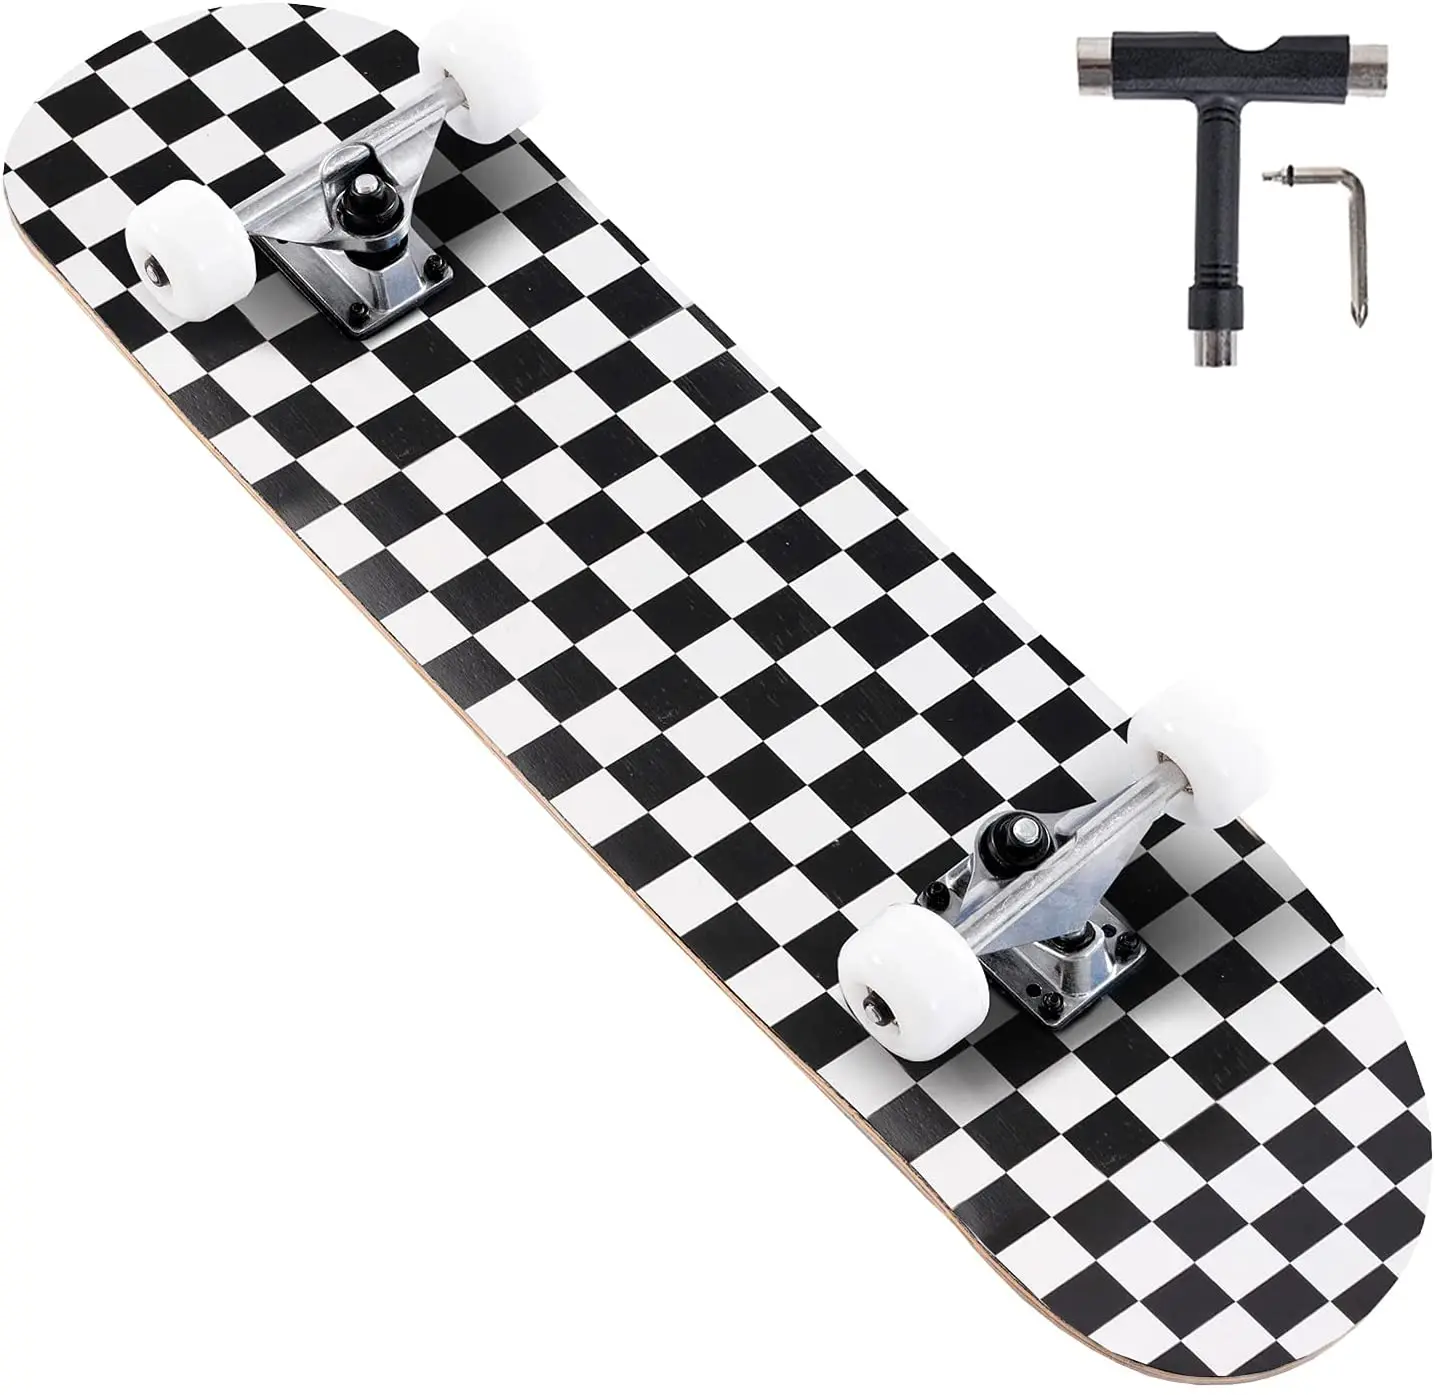 

Wellshow Sport 31 Inch Skateboards Complete Skateboard Maple Double Kick Concave Skateboards for Kids Youth Teens Adults, Starry